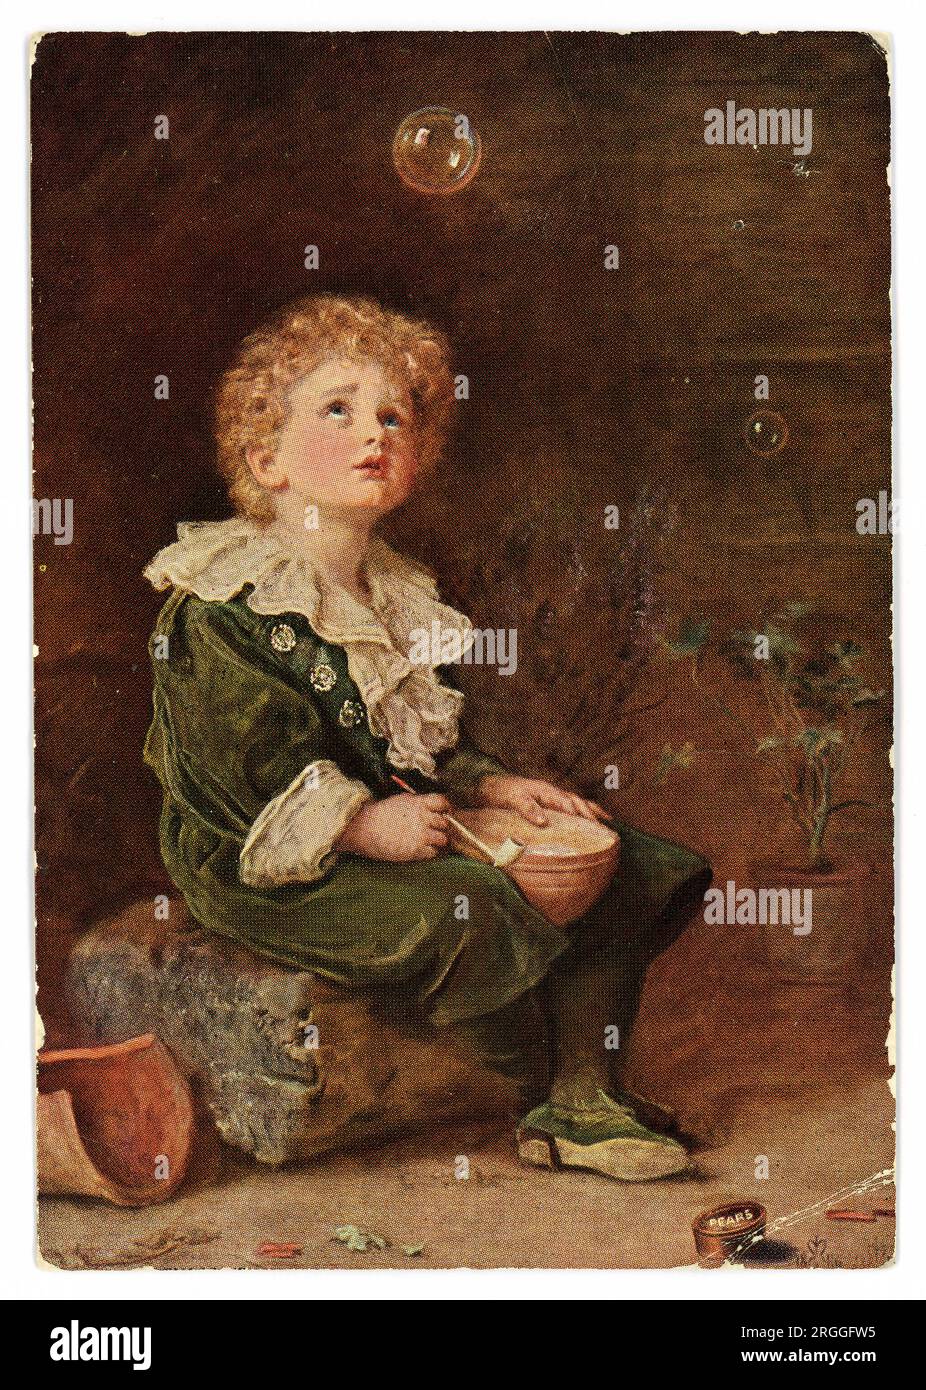 Original charming early 1900's postcard promo card for Pear's soap - illustration of an angelic looking child blowing bubbles with a clay pipe was taken from an1886 painting by Sir John Everett Millais originally titled a Child's World, but renamed Bubbles once it was sold to Pears for the famous Pear's soap advert. A bar of Pears soap can be seen in the bottom right of the picture. This painting  became one of the most reproduced advertising images ever. It depicts Millais’s four-year-old grandson William Milbourne James. Millais was the youngest ever member of the British Royal Academy. U.K. Stock Photo